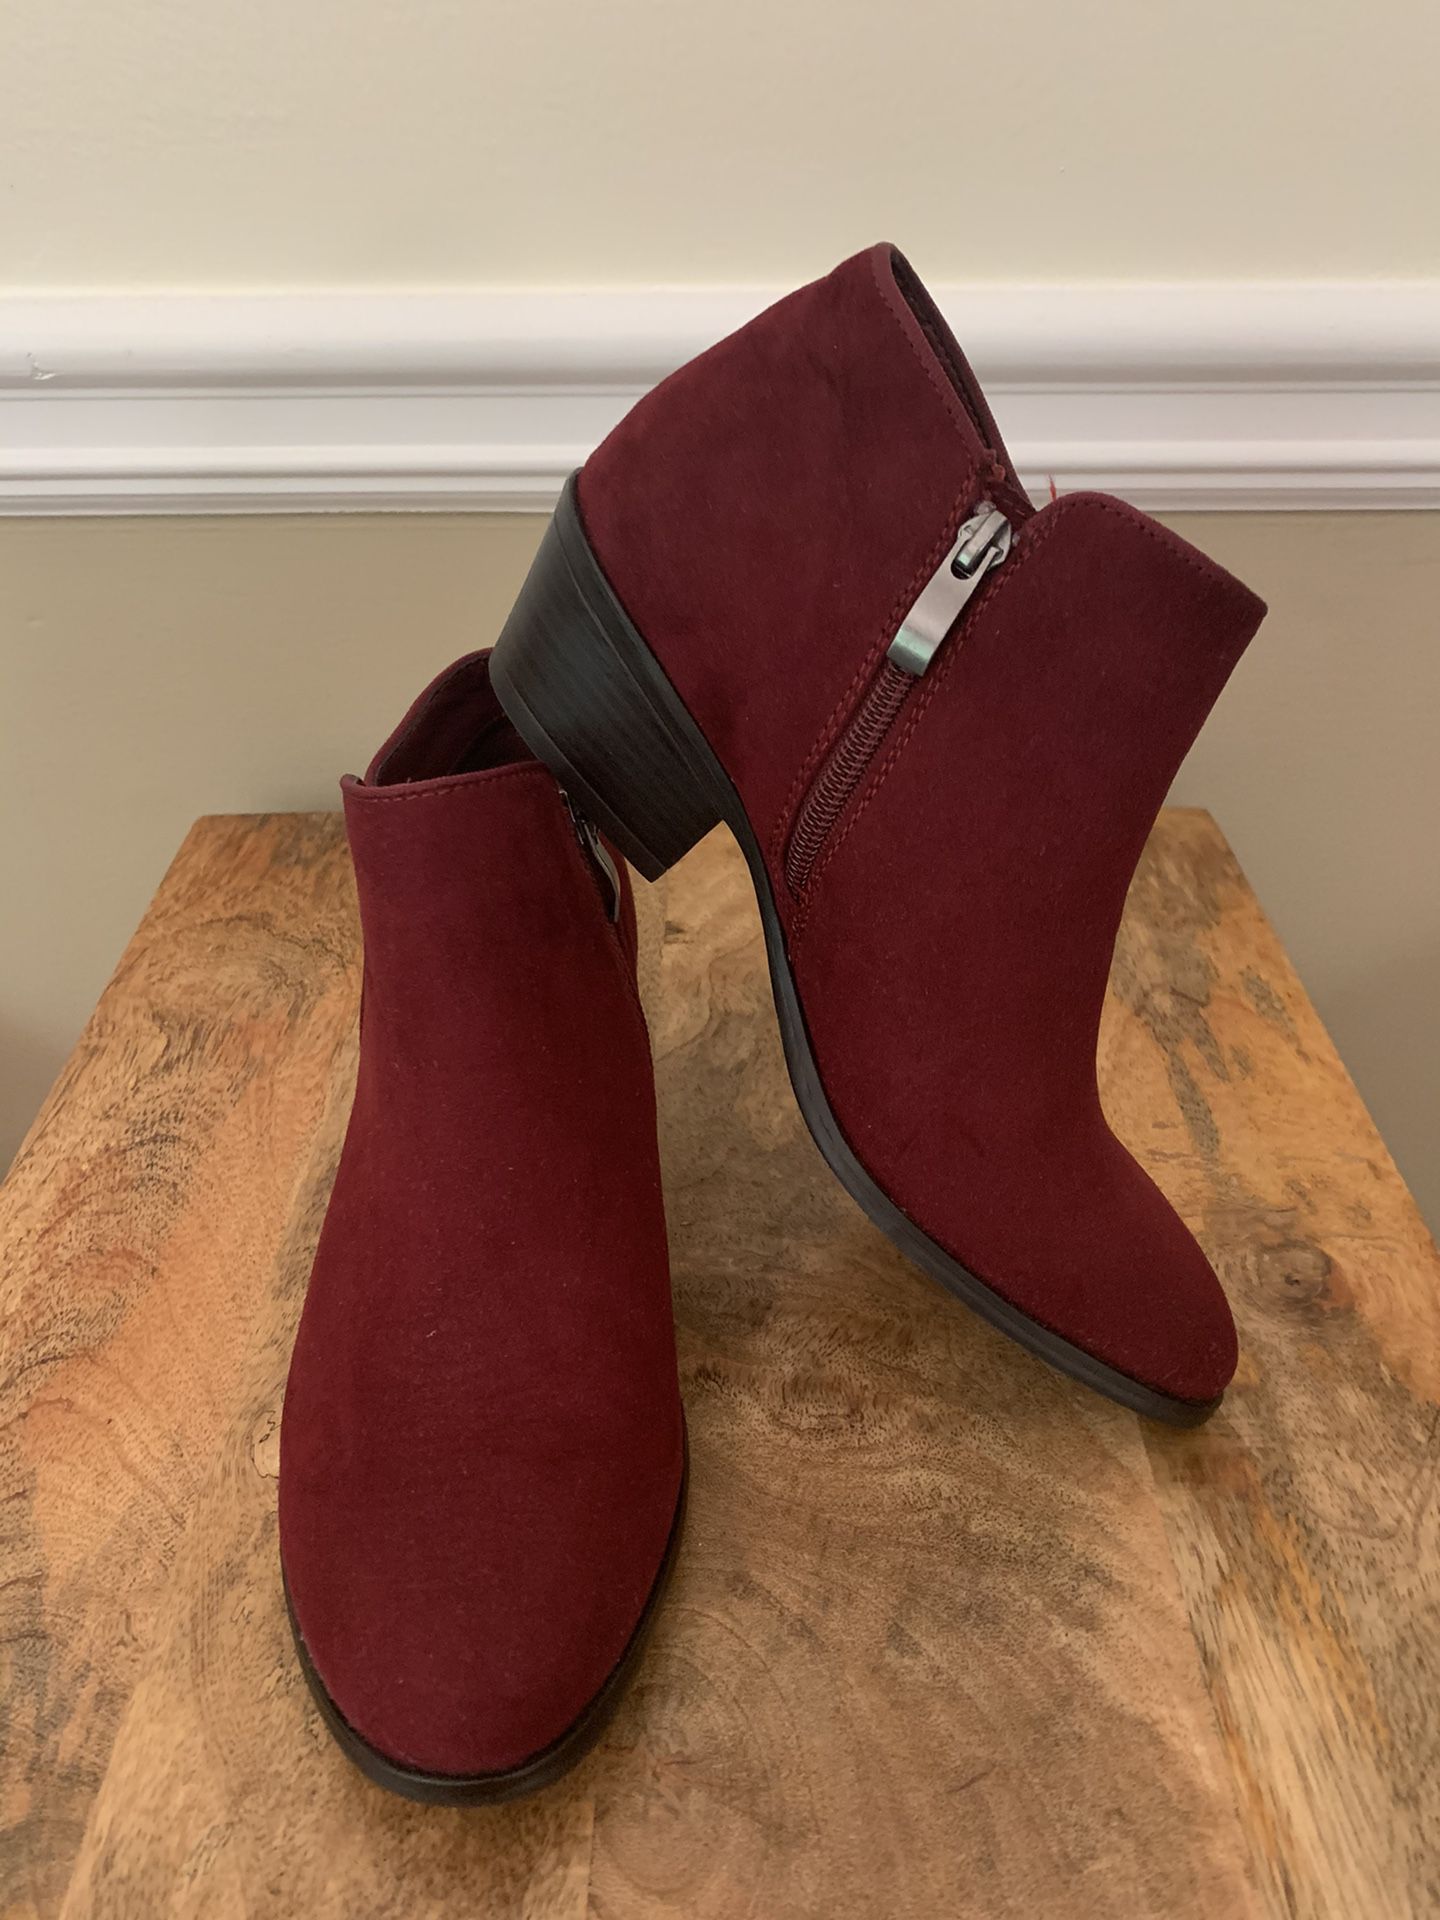 Xappeal Red Suede Ankle Boots/Booties Size 6